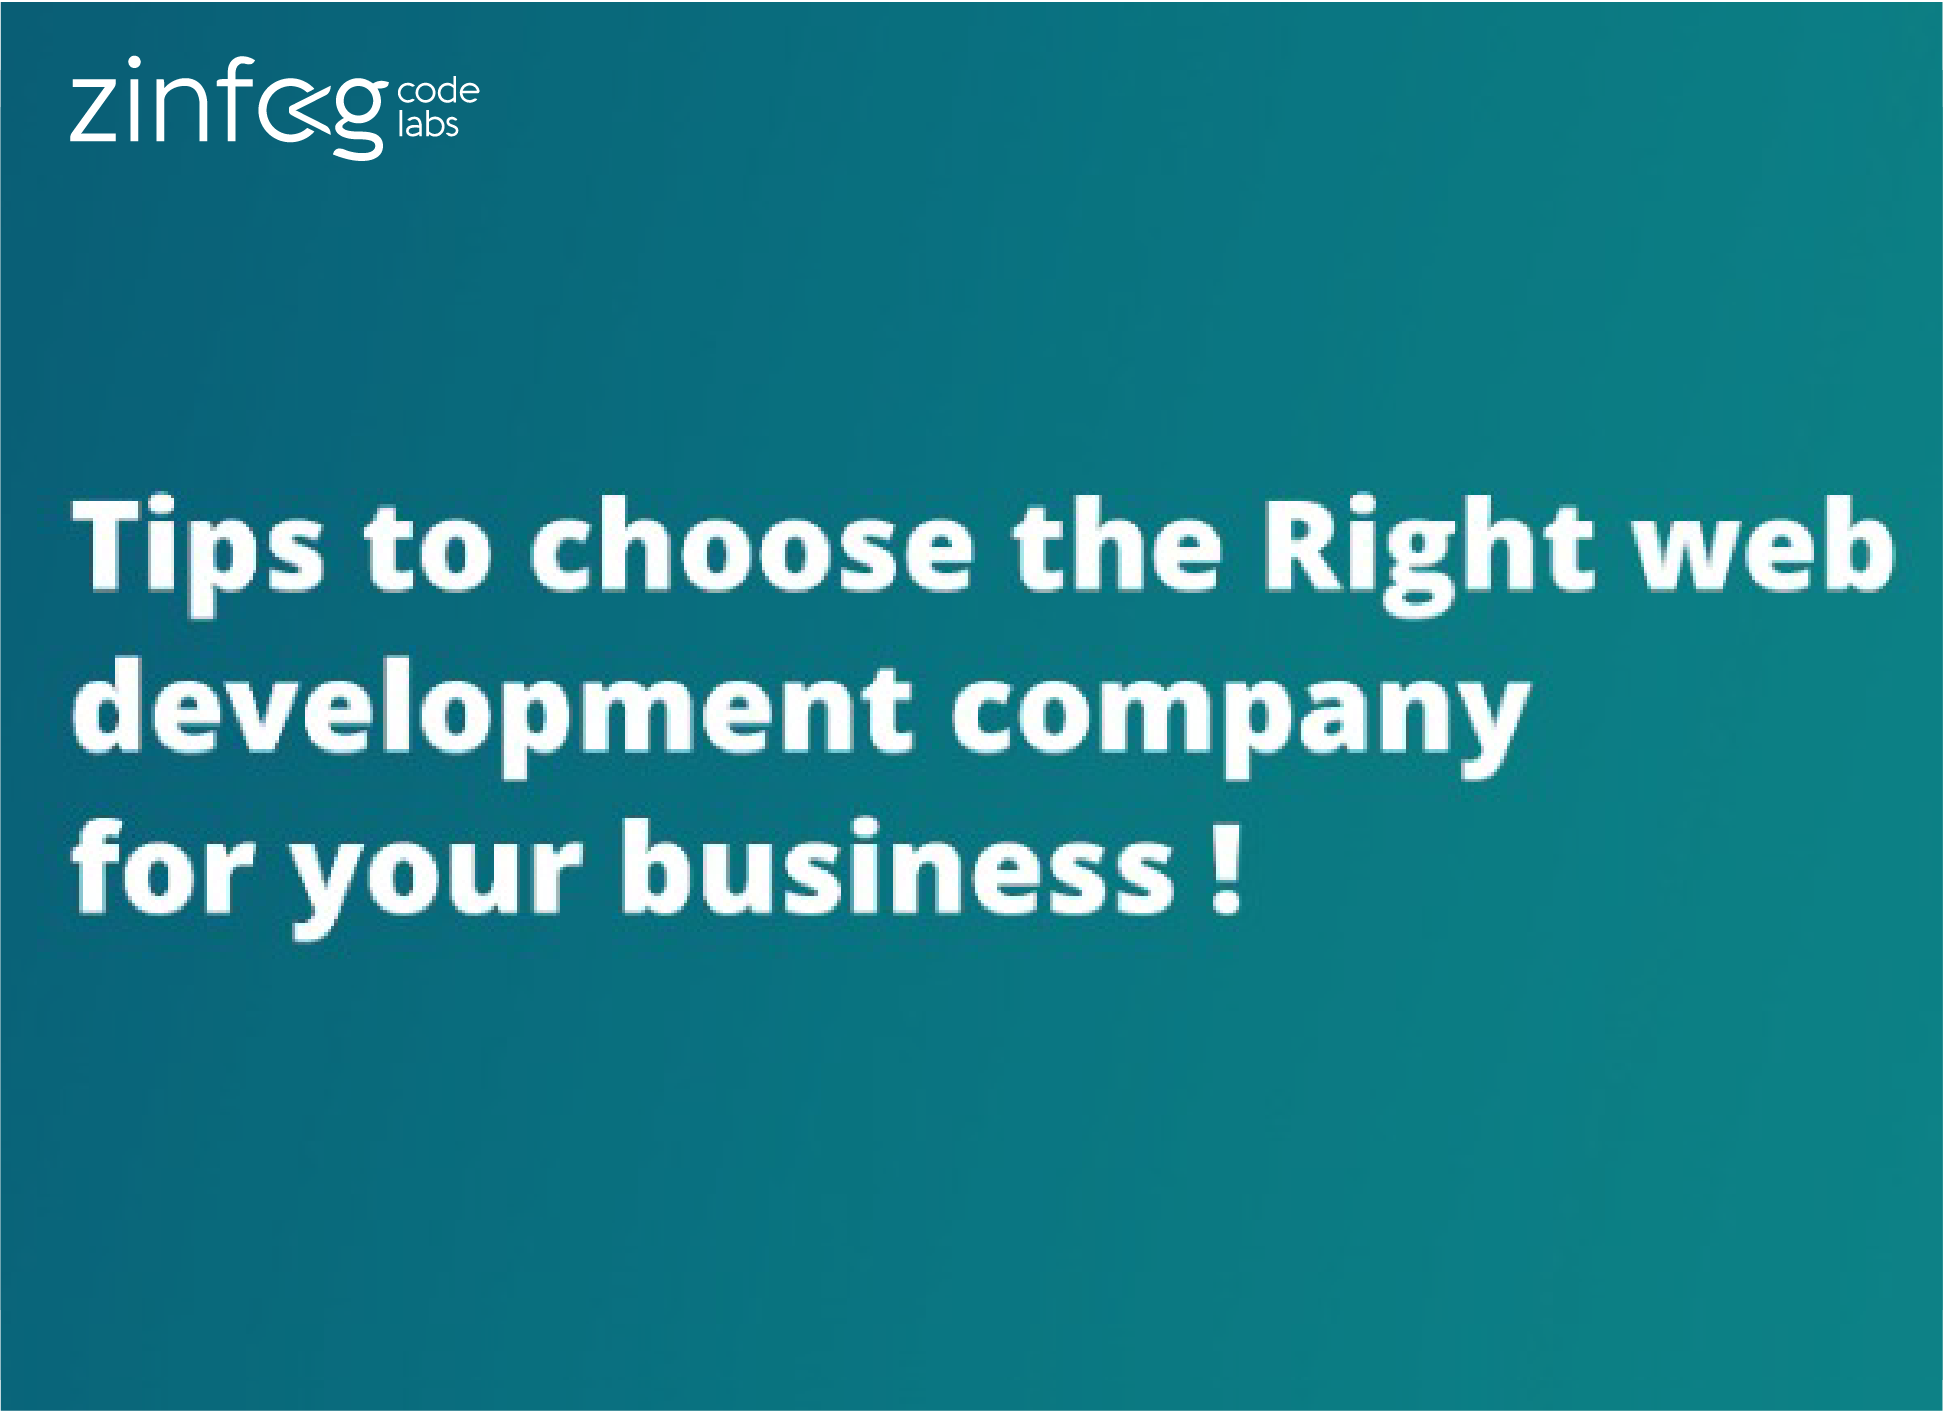 tips_to_choose_the_right_web_development_company_for_your_business.html